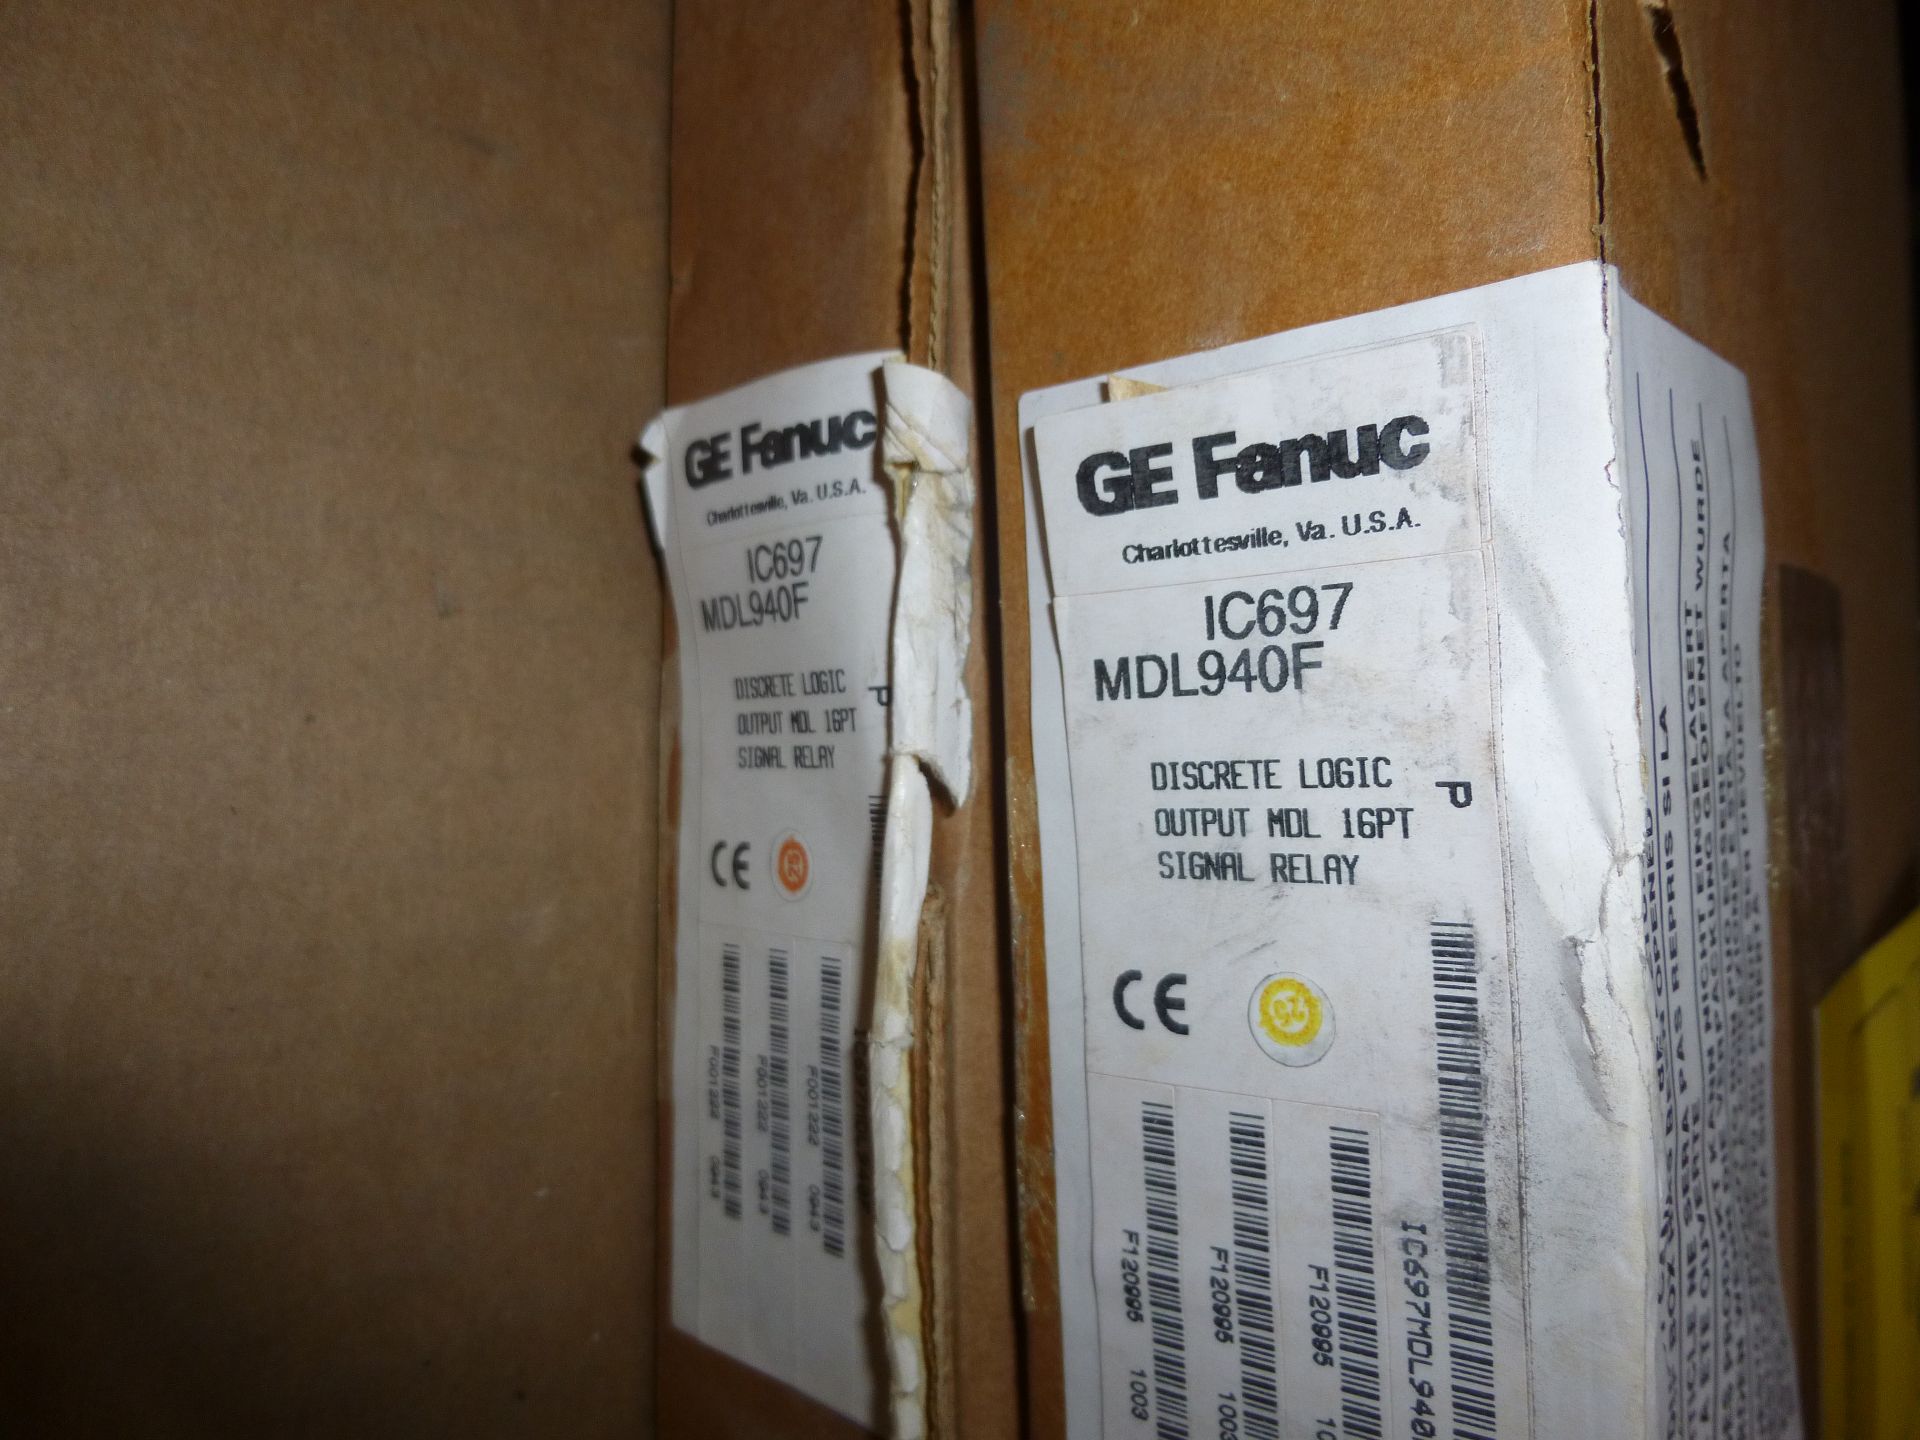 Qty 2 GE Fanuc IC697MDL940F, as always with Brolyn LLC auctions, all lots can be picked up from - Image 2 of 2